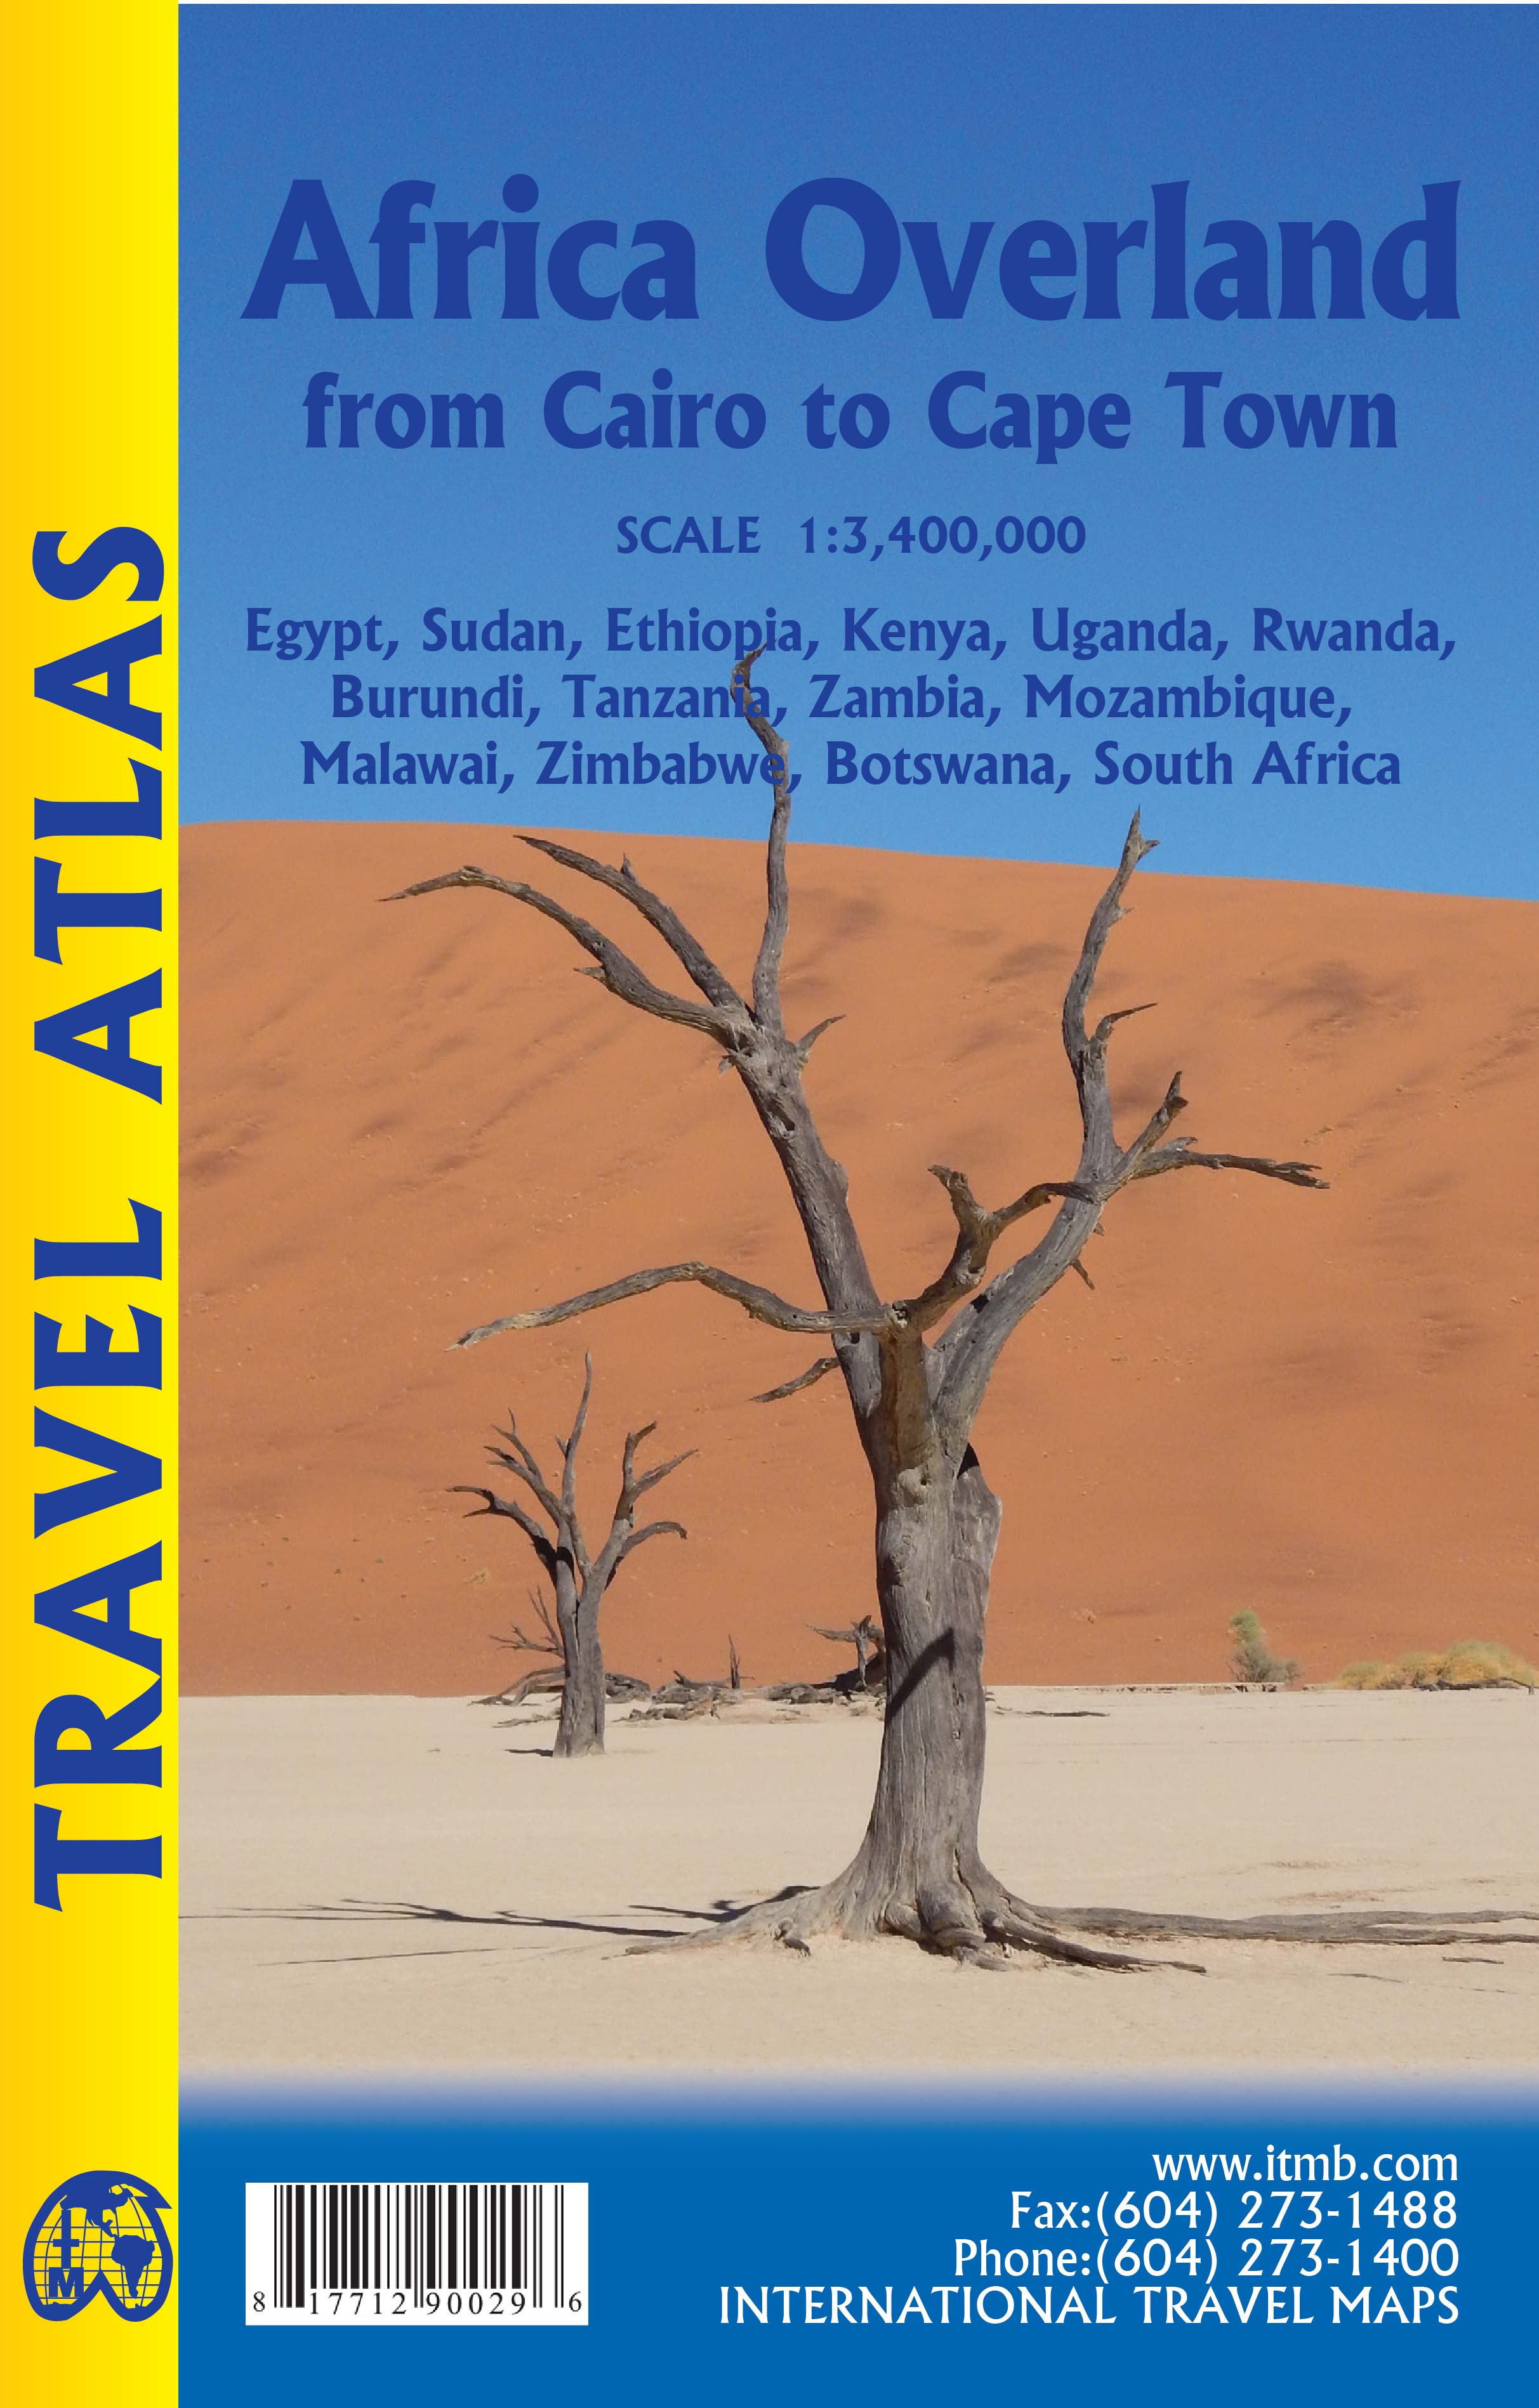 1. Africa Overland Travel Atlas: Cairo to Cape Town 1:3,400,000